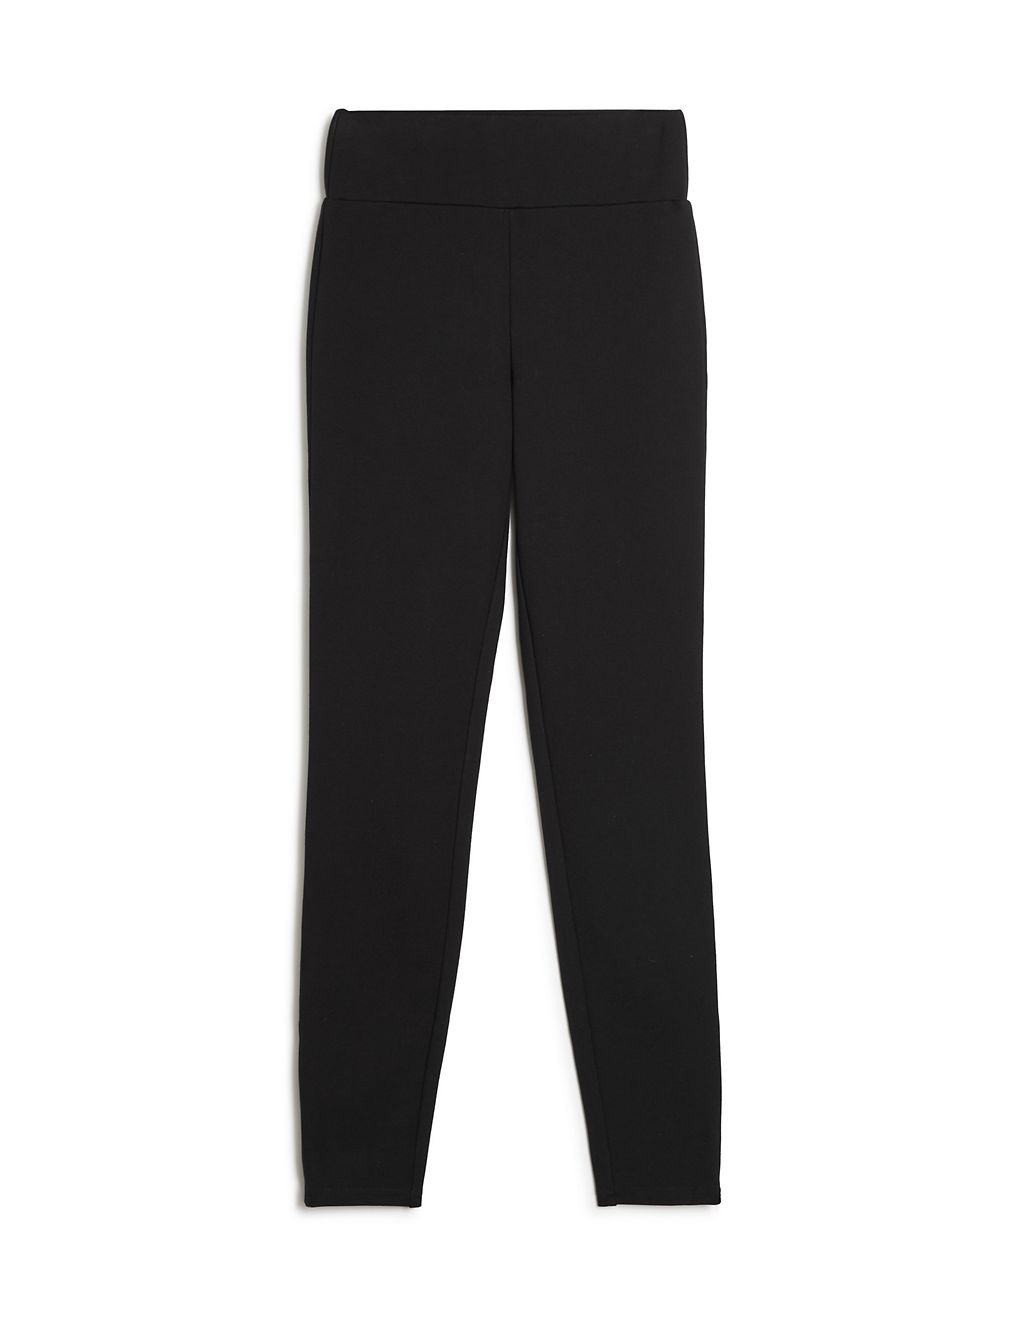 Jersey Elasticated Waist Slim Fit Trousers | Albaray | M&S